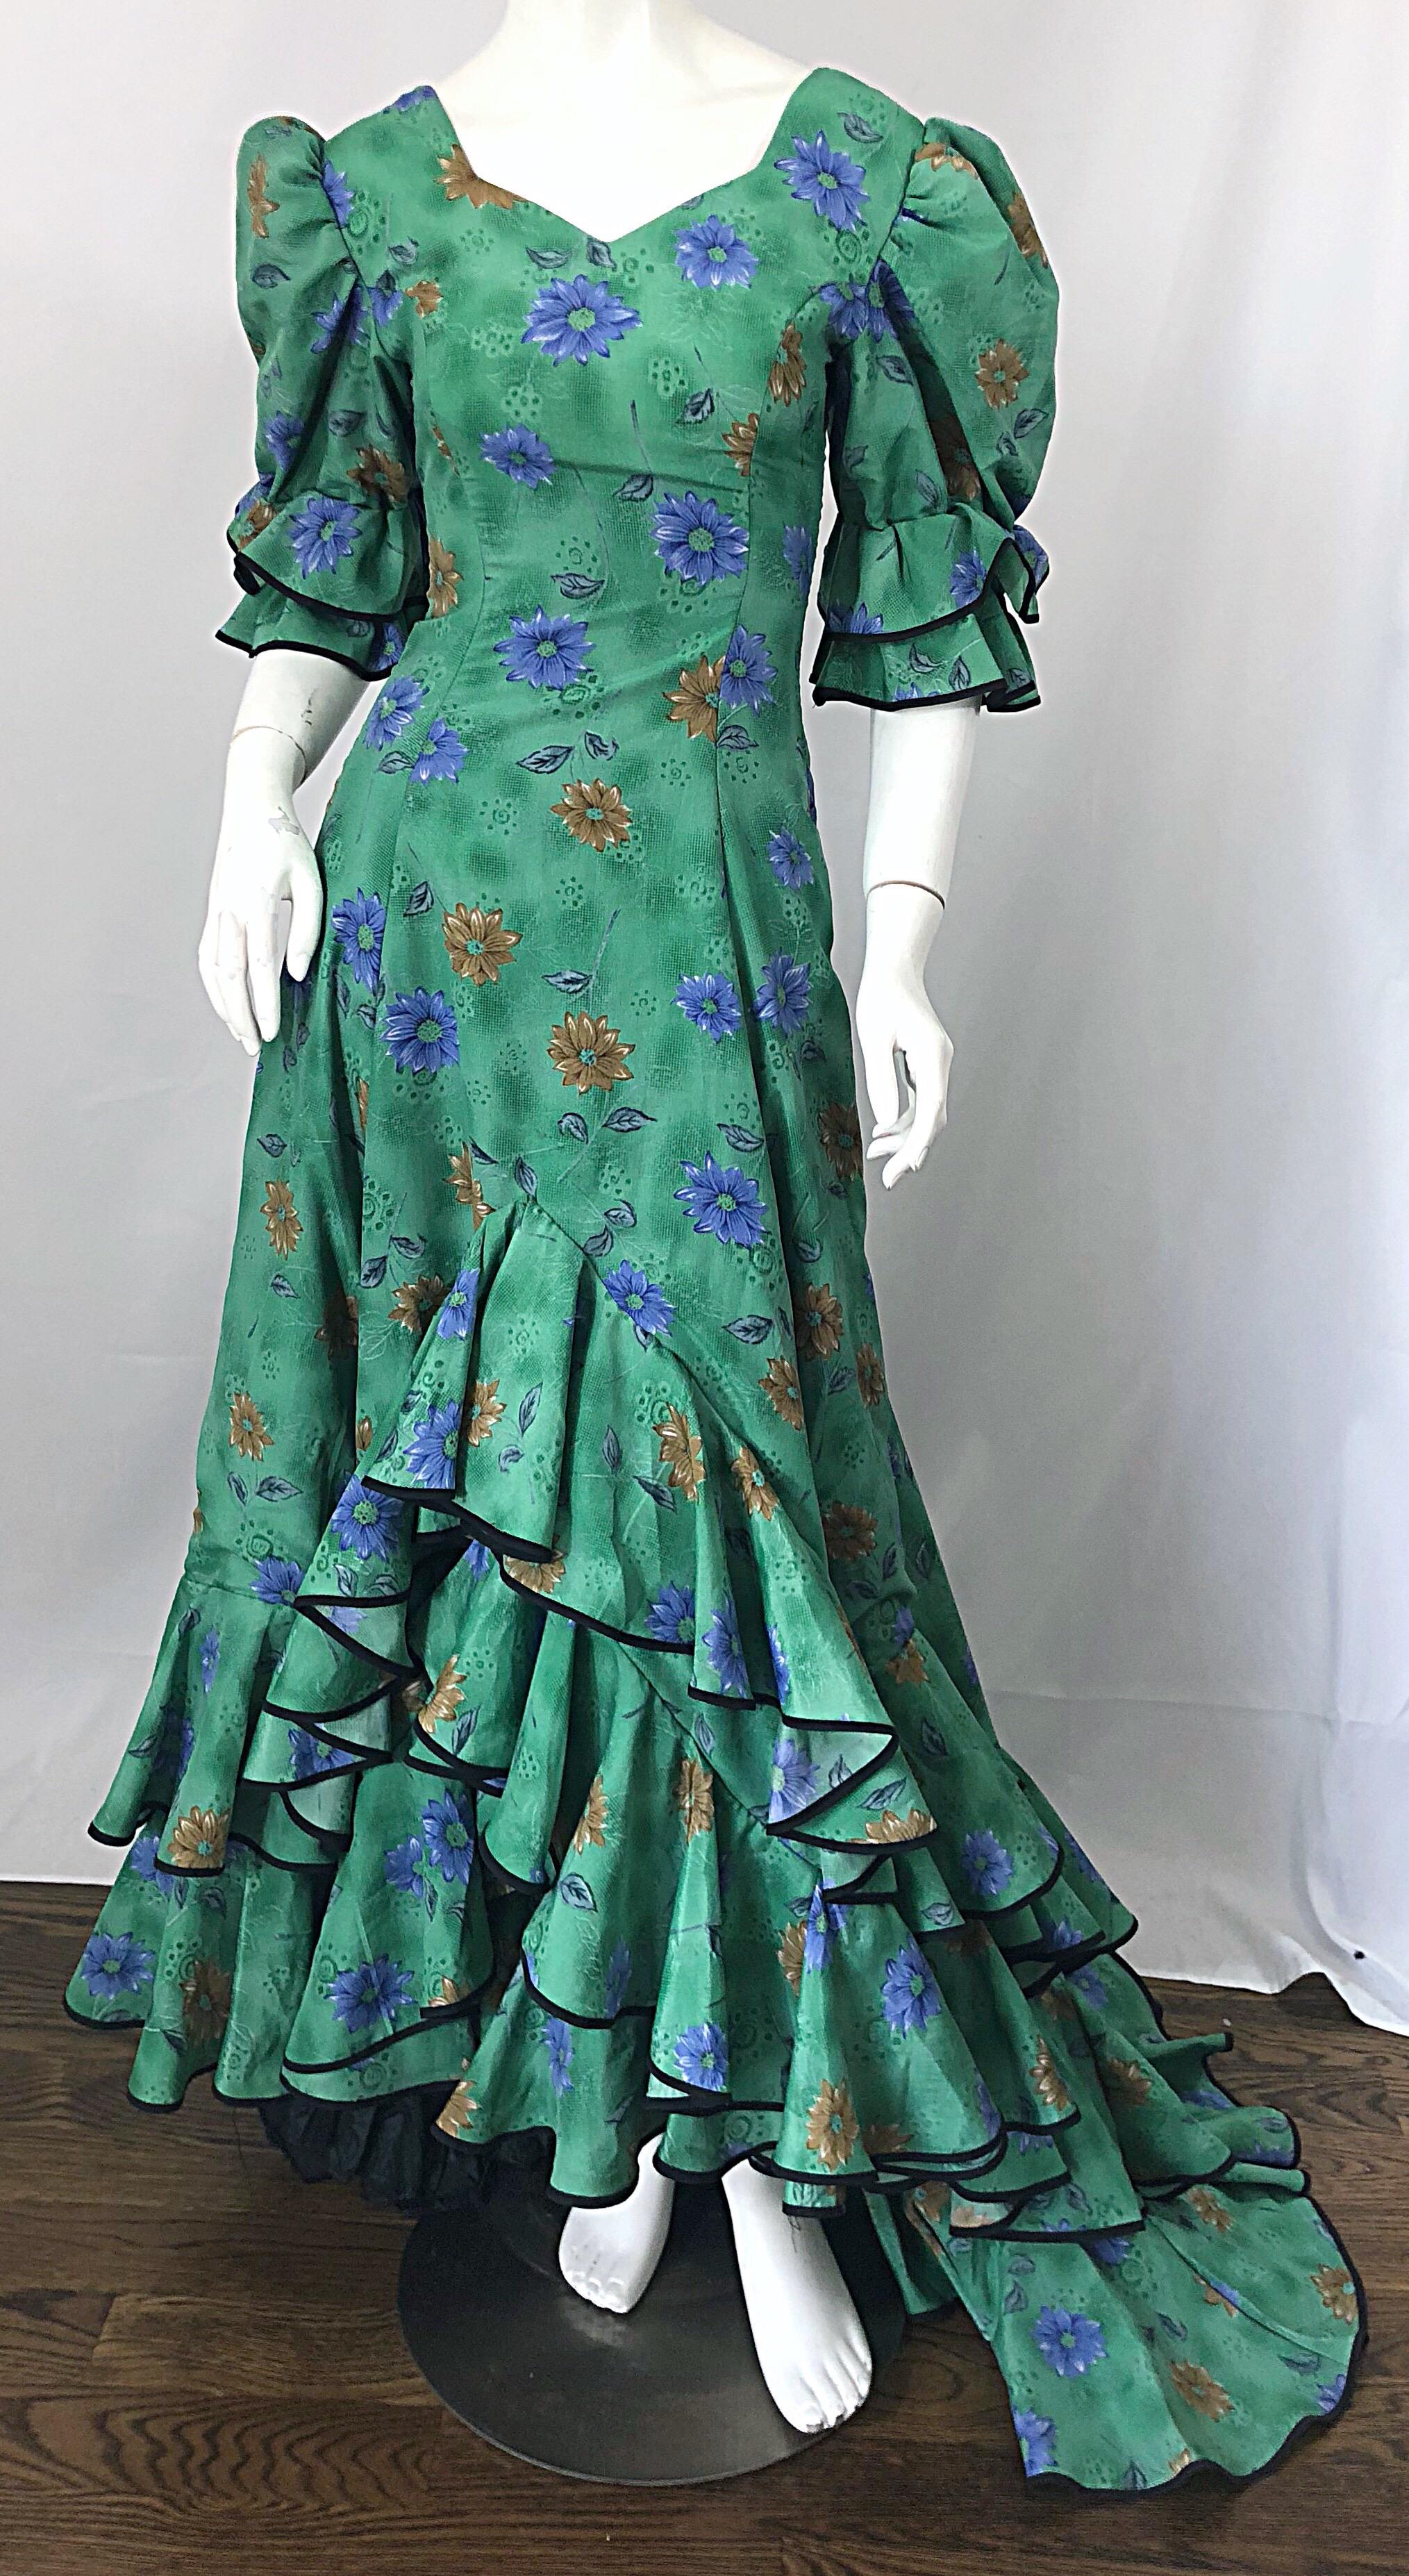 Amazing Vintage Victorian Inspired 1970s Does 1800s Steampunk Green Trained Gown For Sale 2